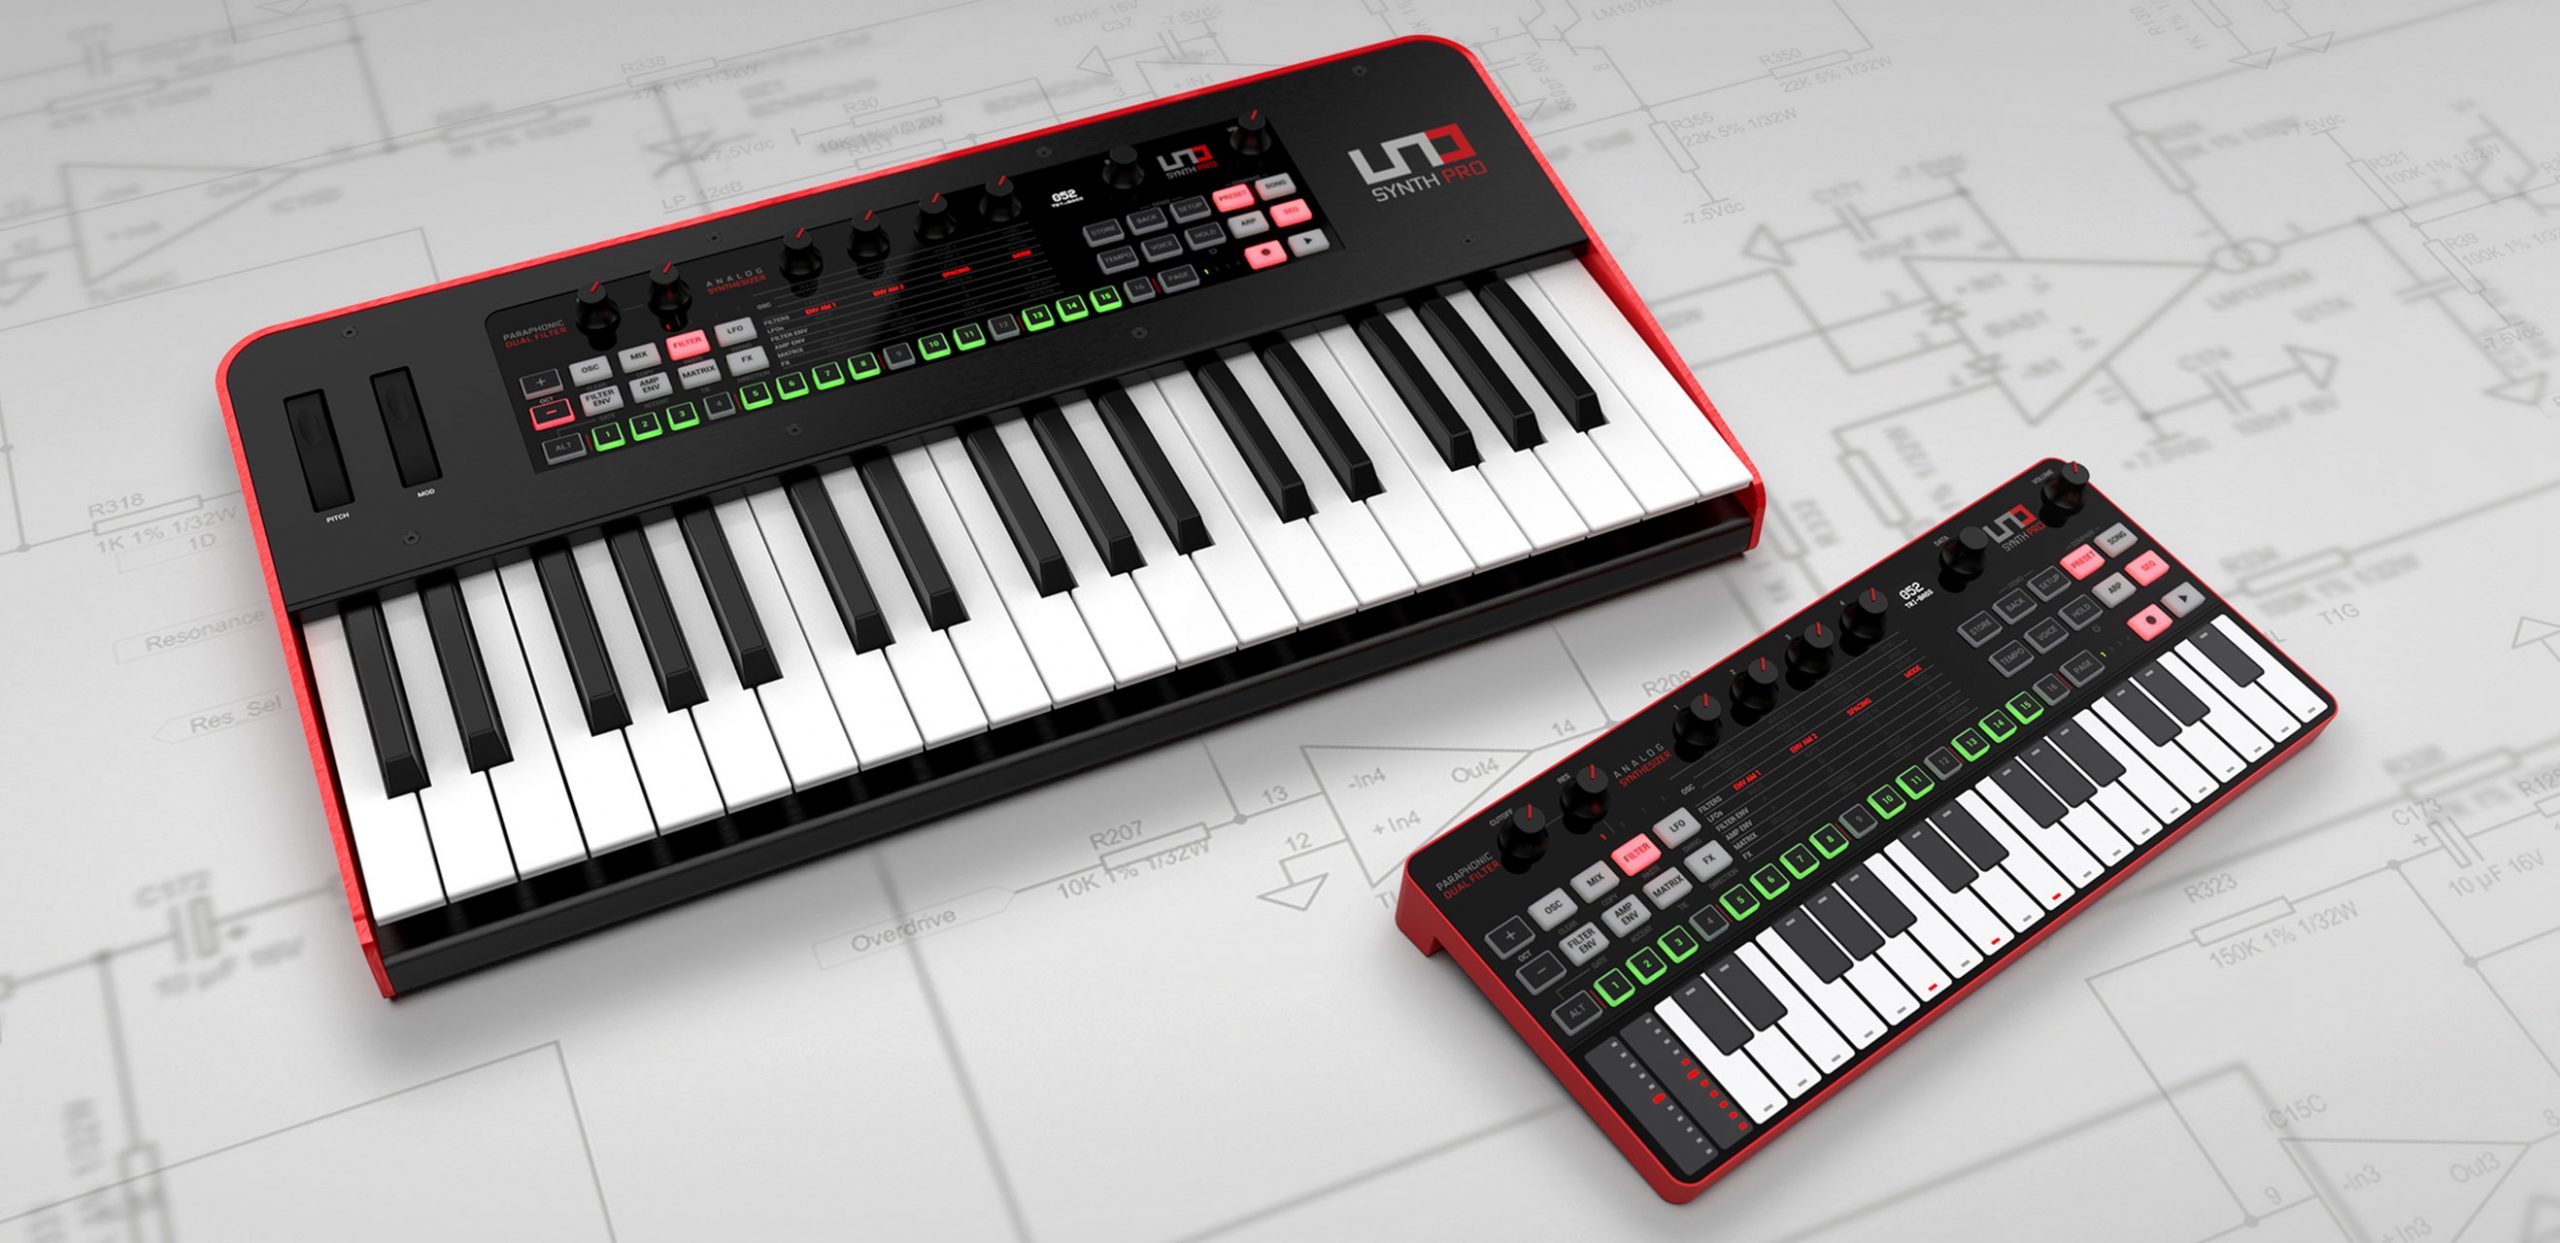 Have IK Multimedia just launched the next generation of analogue of synth with UNO Pro?